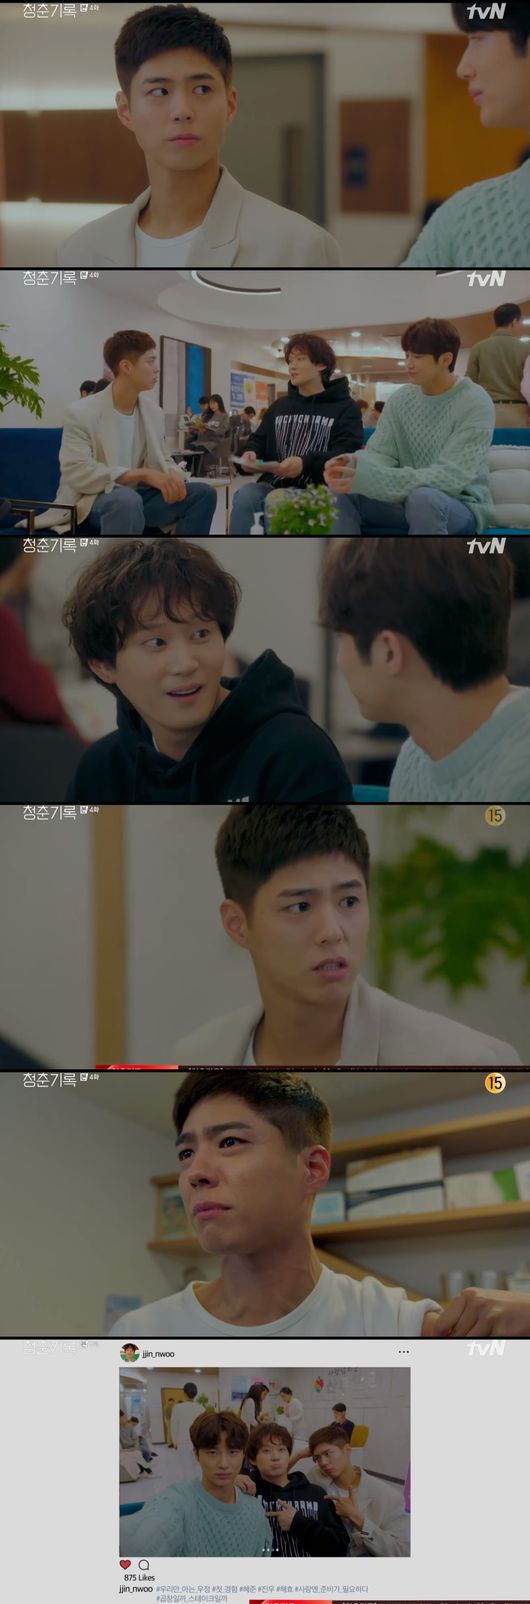 Park Bo-gum was vaccinated with a Cervical cancer.In TVN Record of Youth broadcast on the 15th, Won Hae-hyo (Wooseok) asked Ahn Jeong-ha (Park So-dam) to make up for a movie shooting scene while Park Bo-gum performed a Cervical Cancer Vacination.On that day, Sa Hye-joon and Won Hae-hyo rushed to the hospital at Kim Jin-woos SOS request.Kim Jin-woo recommended a Cervical cancer shot.Earlier, Hannah Jeter told me to get a Cervical Cancer shot to go to the world of 19 gold.Did you tell me to be a GFriend? asked Sa Hye-joon. Did you have a GFriend? Break up.I do not know who we are, said Sa Hye-joon. We seem to know. Won Hae-hyo said, Are you meeting Hannah Jeter?But Kim Jin-woo, who was proudly lying, said, No. So Won Hae-hyo said, I know its not crazy yet, but I know its not between family members.Sa Hye-joon told Won Hae-hyo that he signed with Lee Min-jae (Shin Dong-mi). So Won Hae-hyo said, What does Min-jaes sister know?So, Sa Hye-joon said, Your company did not refuse me, I refuse.Meanwhile, Stable Pearl (Geo Ji-seung) apologized to Desiigner for not going to education the day before; Stable said: Im sorry, I havent been educated and I havent received a phone call.But Desiigner sarcastically said, You really dont fit with me, Ill understand you, good boy.Kim Yi-young (Shin Ae-ra) made a reservation with Ahn Jeong-ha and appeared. Kim Yi-young said, Dont feel sorry. I will take it from Sam An Jeong-ha.I thought my son was more capable than comfortable, but I want to see it once because he says he is not a pearl. On this day, Sa Hye-joon went to the schedule with Lee Min-jae, who told Sa Hye-joon to sit in the back of the car, but eventually Sa Hye-joon moved to Lee Min-jaes side.I want to be a simple star, I drive well, said Sa Hye-joon, but Lee Min-jae said, The world is not like that. There is no such thing as human and retribution, said Lee Min-jae. I will keep my values. Lee Min-jae said, I respect value.But keep my rights to business. Sa Hye-joon received makeup from Ahn Jung-ha. Ahn Jung-has senior Desiigner kept notice. Sa Hye-joon asked, Im a lot confused by Jin-ju Sam.Dont let it in, its my fight, said Stable.You should drink in front of me in the future, its so cute, said Sa Hye-joon, who stabilized. I hear a lot of such things.Won Hae-hyo said, I want you to make up a movie this time. So, Sa Hye-joon said, I am coming out of the movie.If you do it, you will do it. Sa Hye-joon said, It is against the virtue of the prize. Won Hae-hyo said, Why did I ask for the prize?Pearl Desiigner deliberately spilled a drawer that An Jeong-ha had arranged, saying, If only one person has to stay, thats definitely me.: TVN Record of Youth broadcast capture